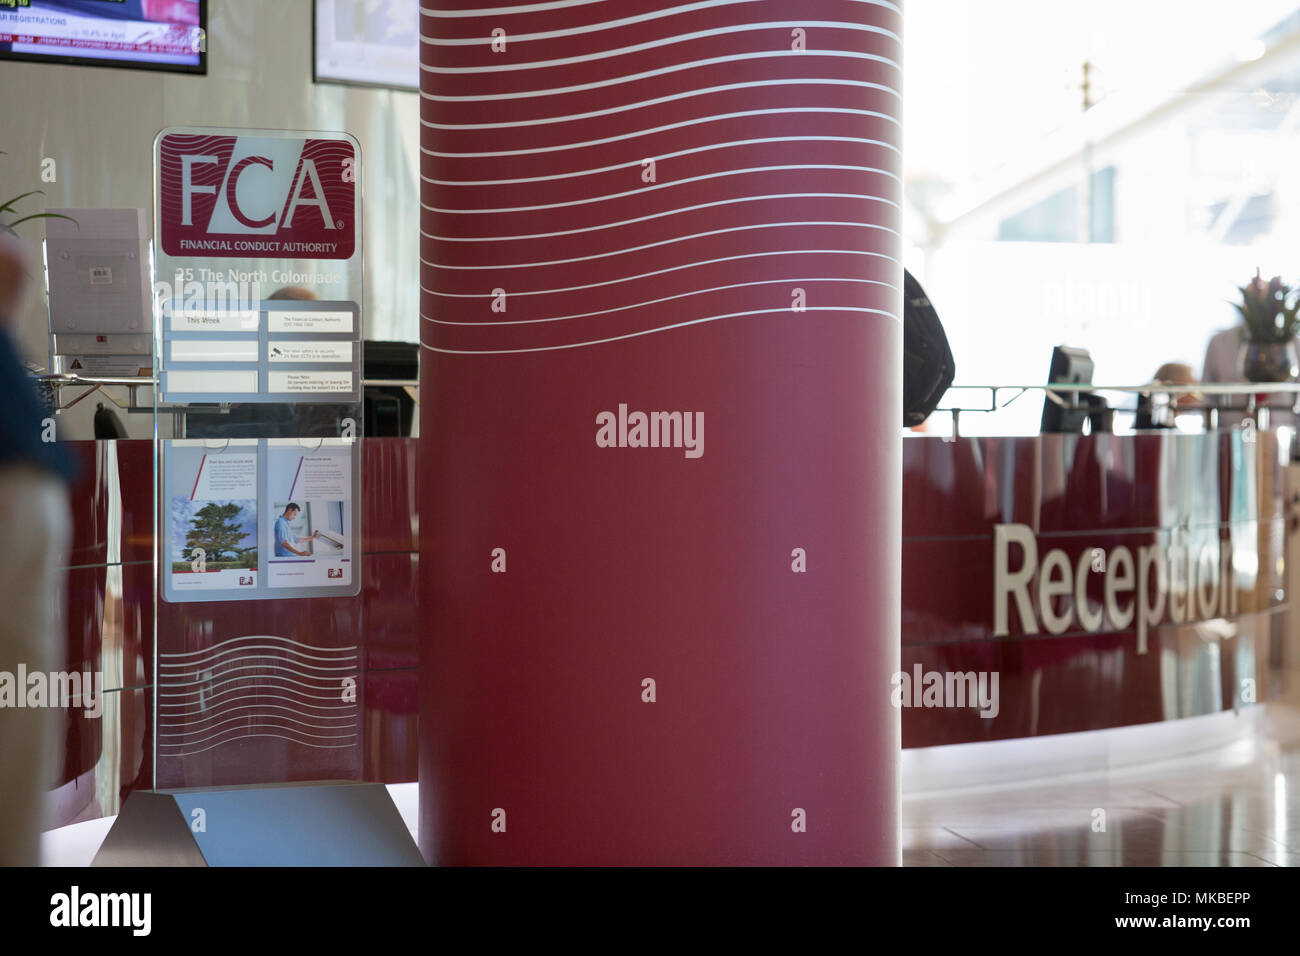 Financial Conduct Authority (FCA) offices, North Colonnade, Docklands, London. Reception showing corporate logo Stock Photo